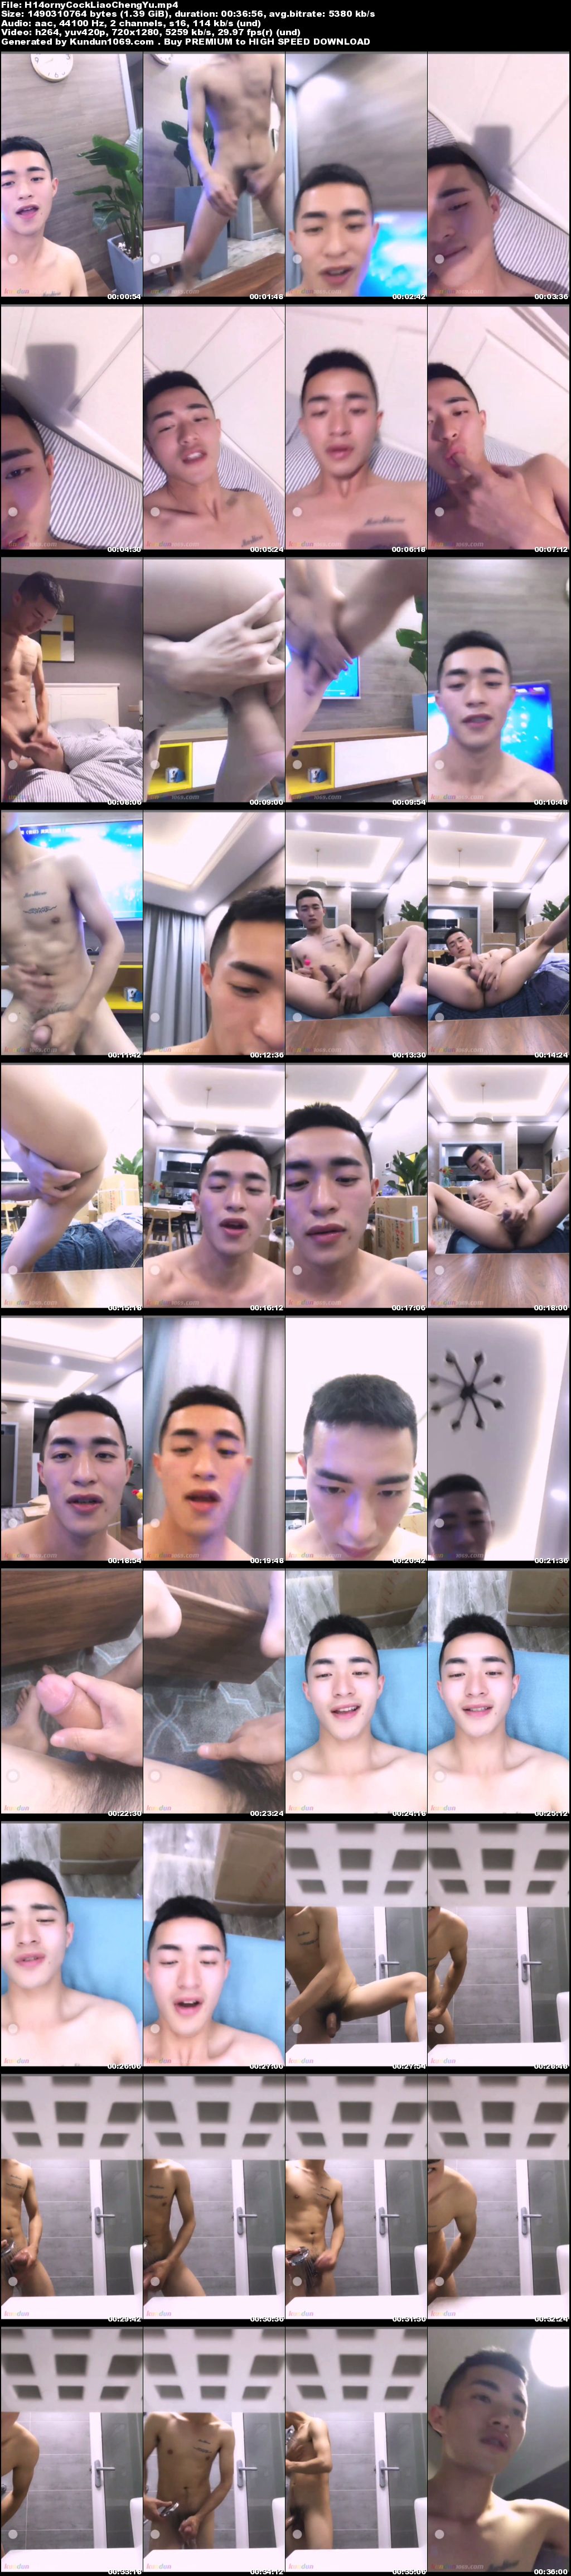 [CHINESE] LIVE BROADCAST – HORNY COCK LIAO CHENG YU 淫欲男 廖承宇